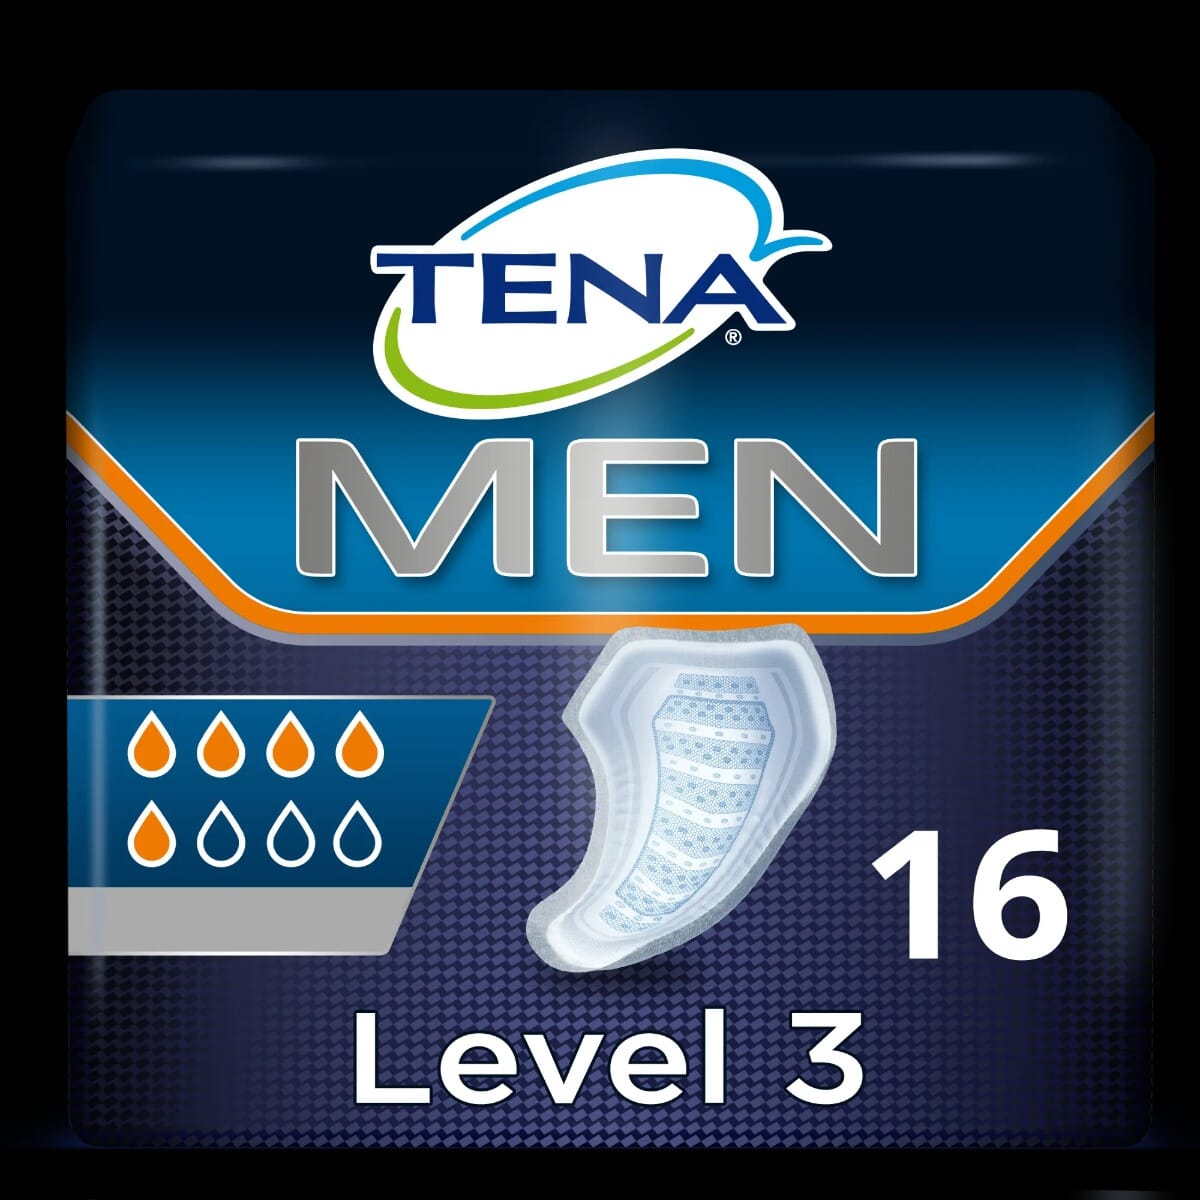 Drakes Online Findon - Tena Men Super Level 3 Absorbent Protector  Incontinence Pads 8 Pack